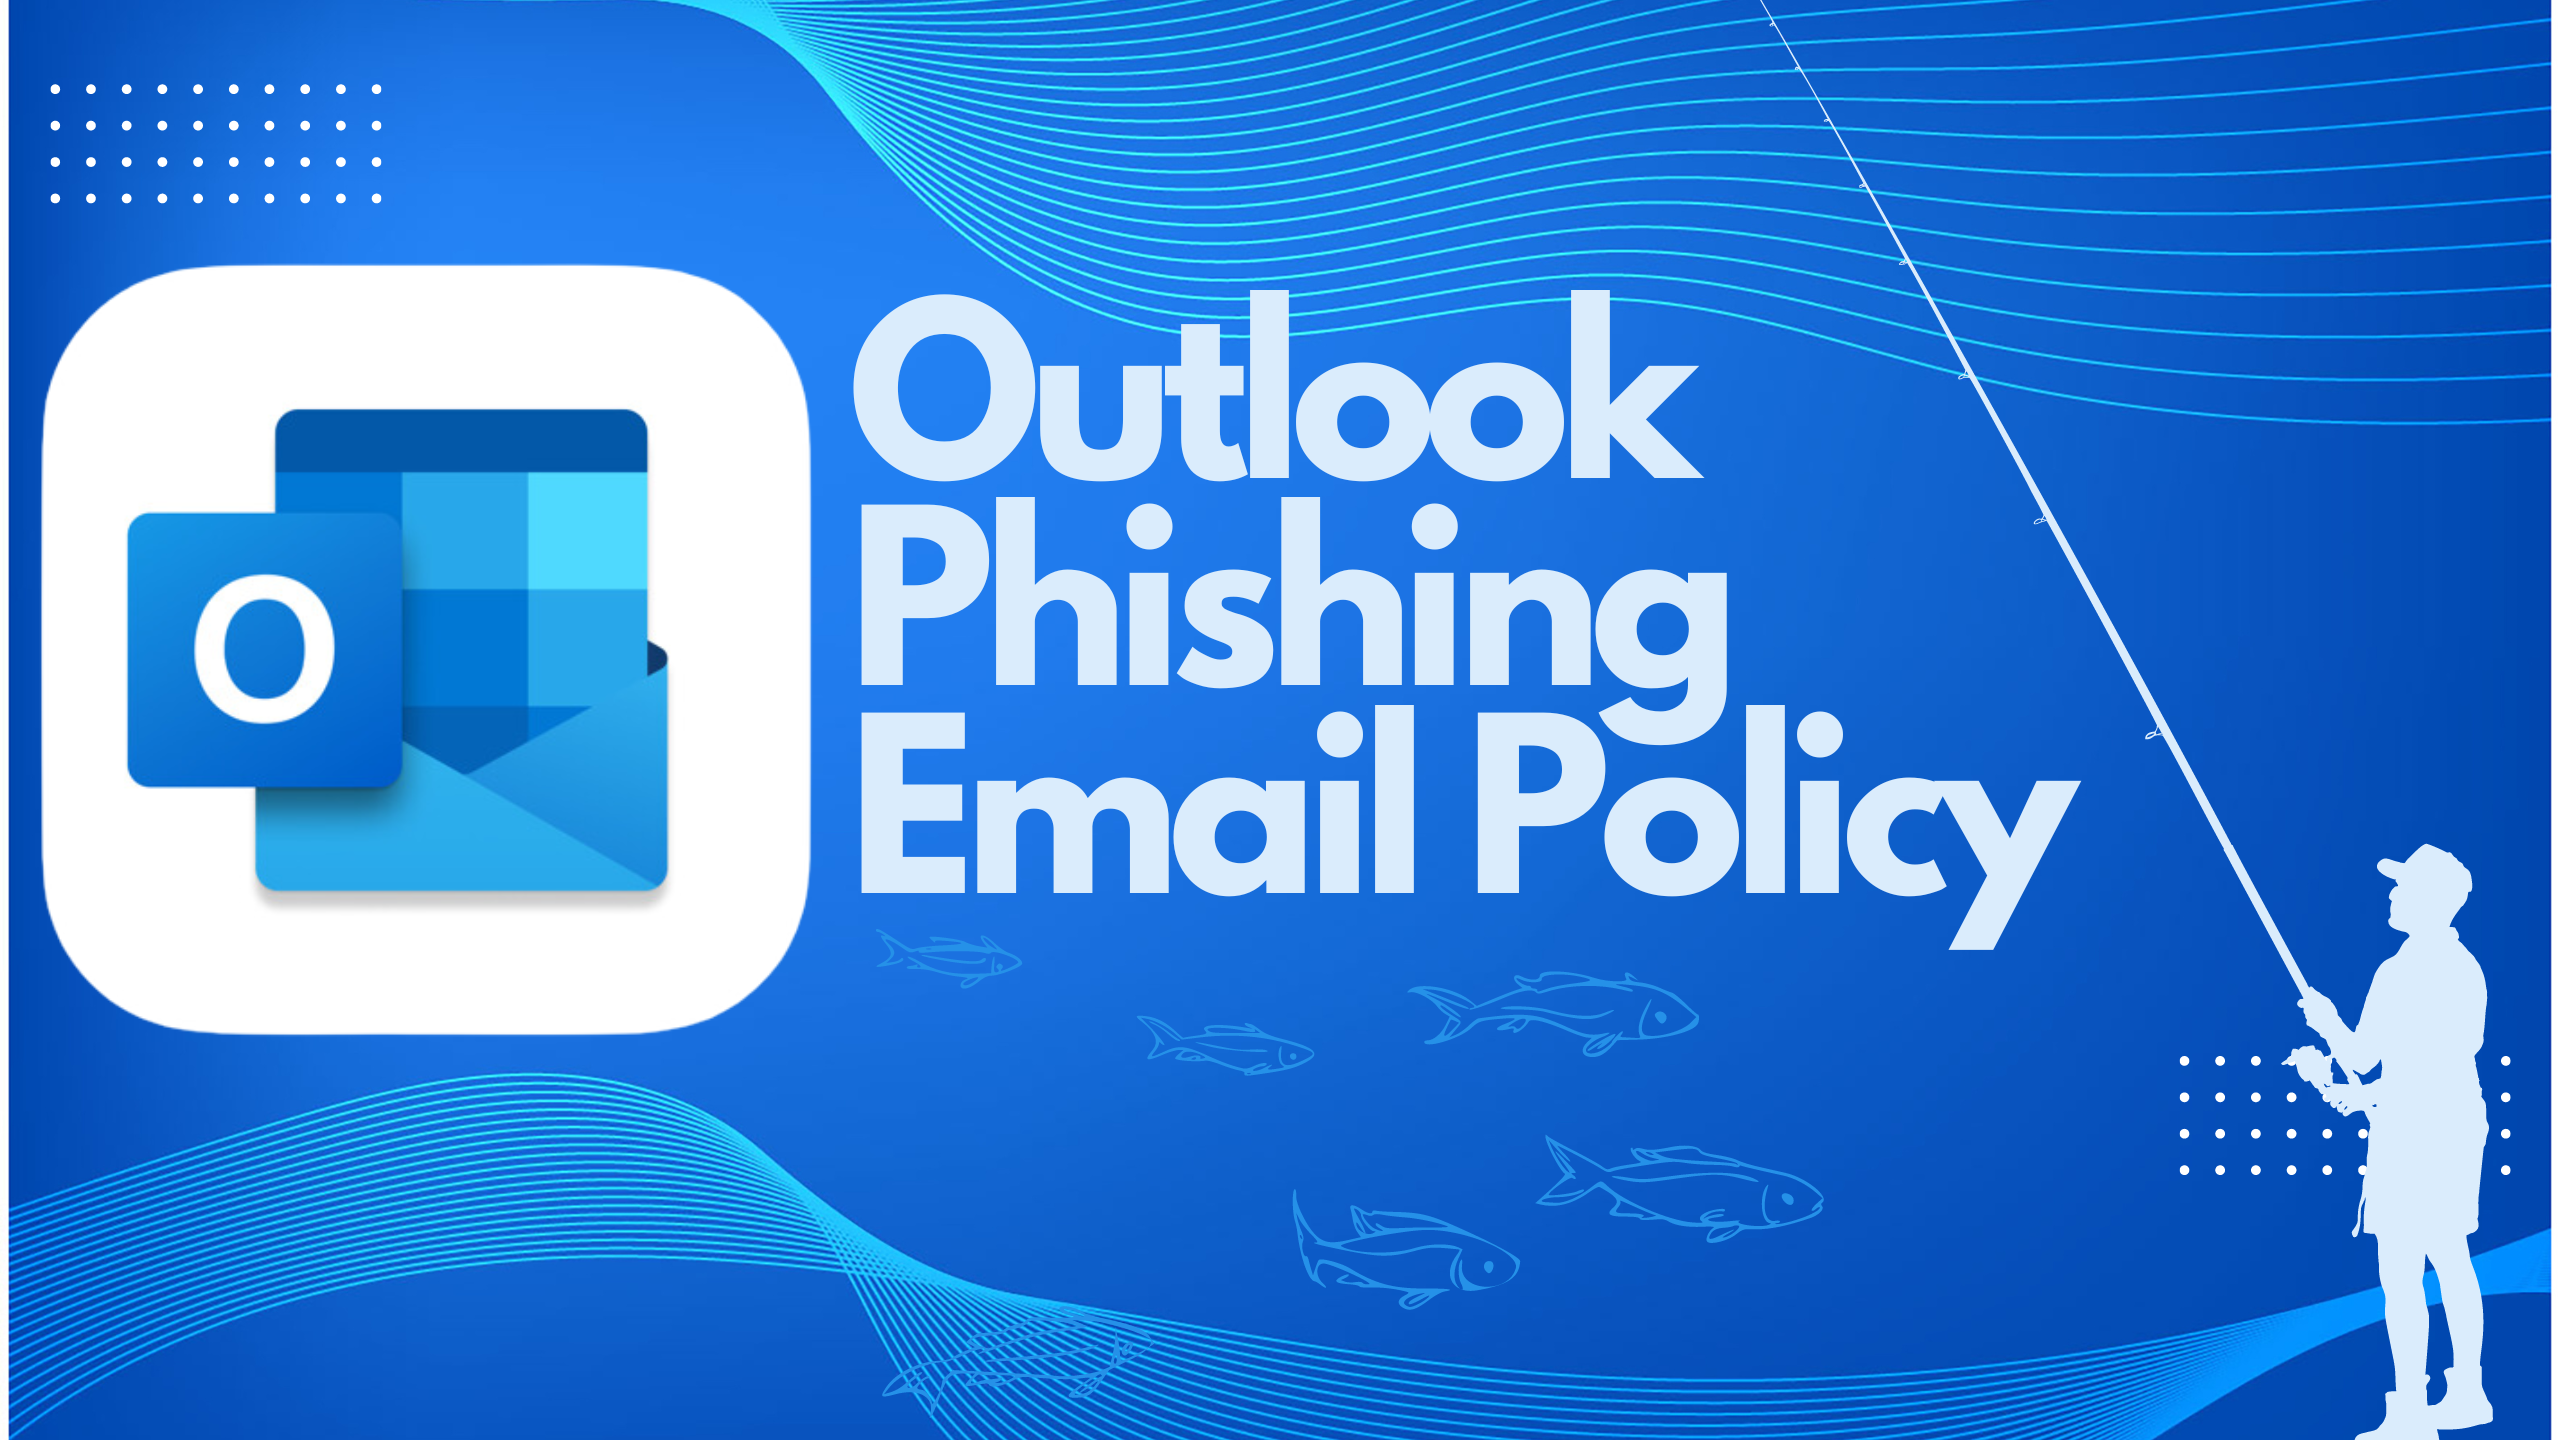 Outlook phishing email policy